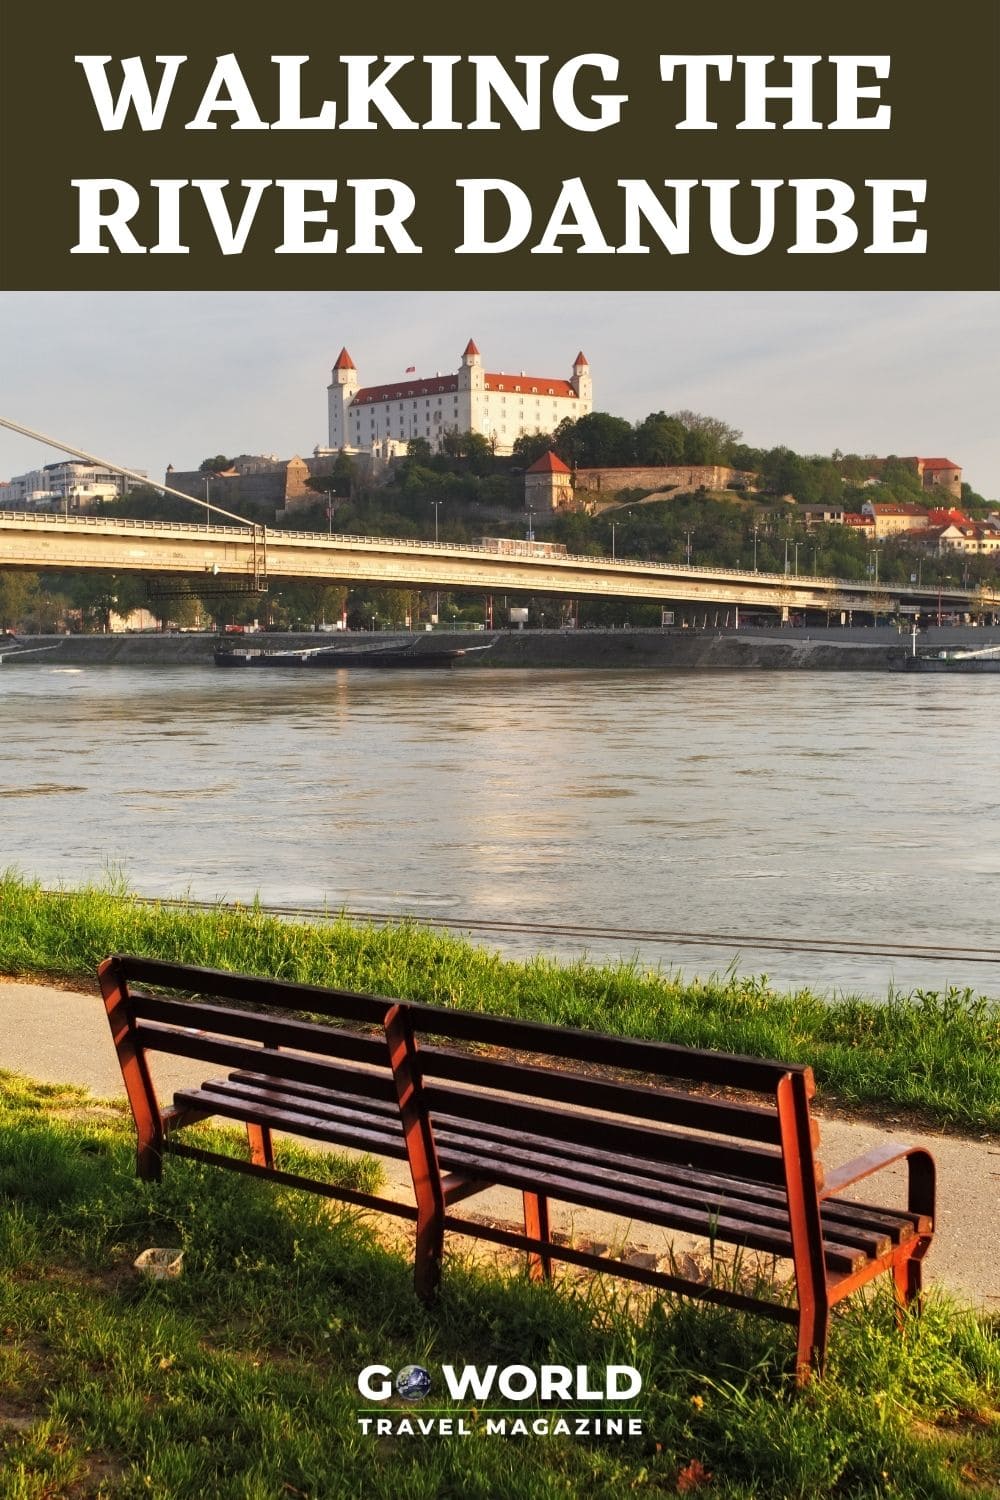 Follow the author as she walks the length of the eastern portion of the River Danube through Serbia, Romania, Bulgaria and Moldova. #danuberiver